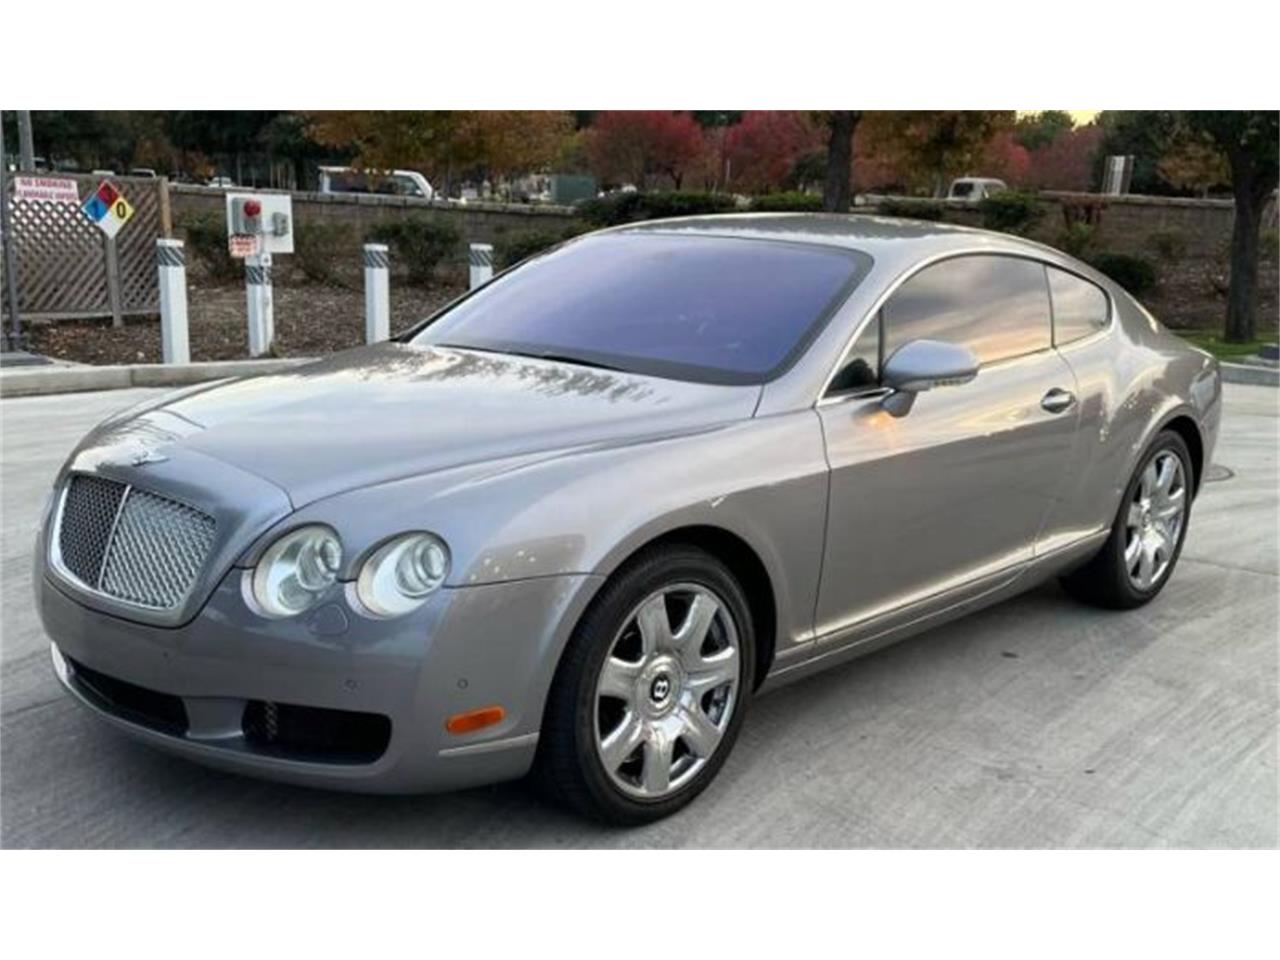 For Sale: 2006 Bentley Continental in Cadillac, Michigan for sale in Cadillac, MI